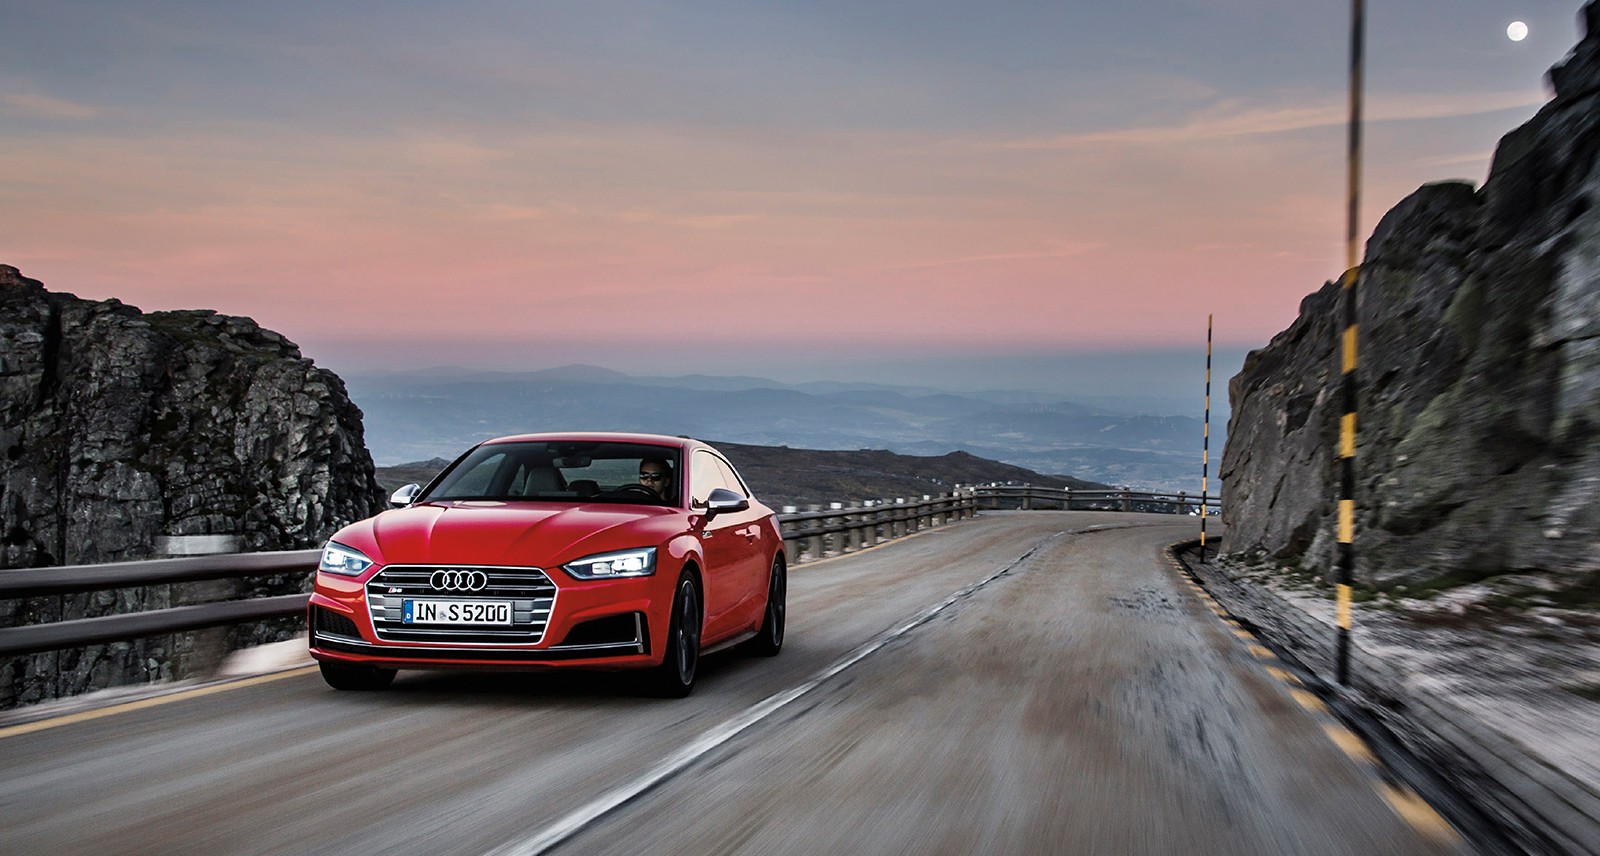 Audi’s Turbocharged S5 Is an Everyday Driver You’ll Actually Want to Drive